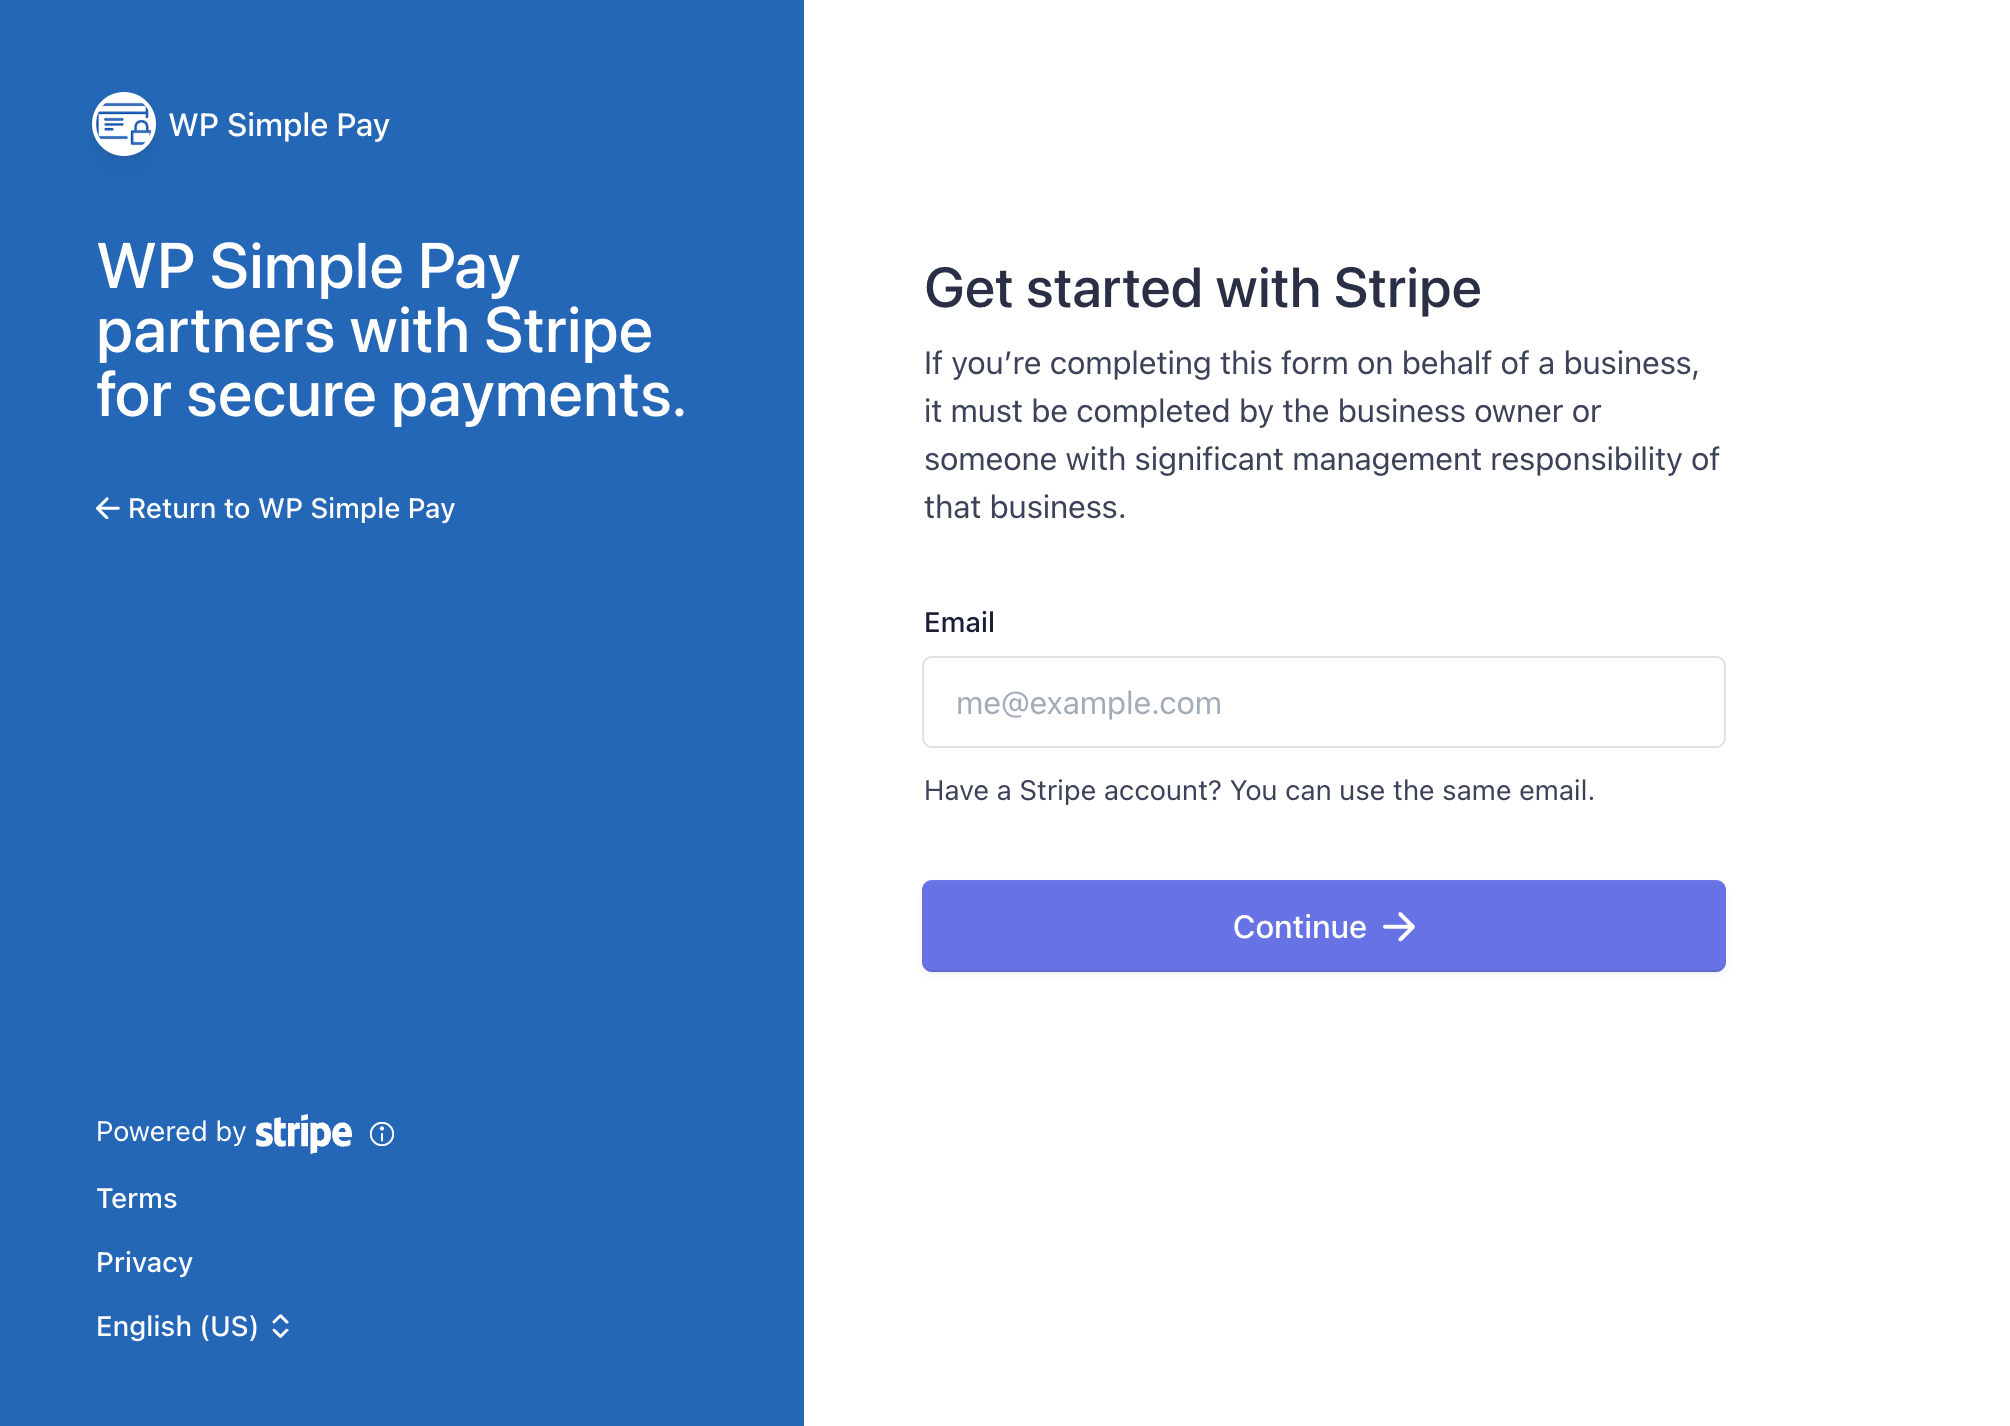 Get started with STripe